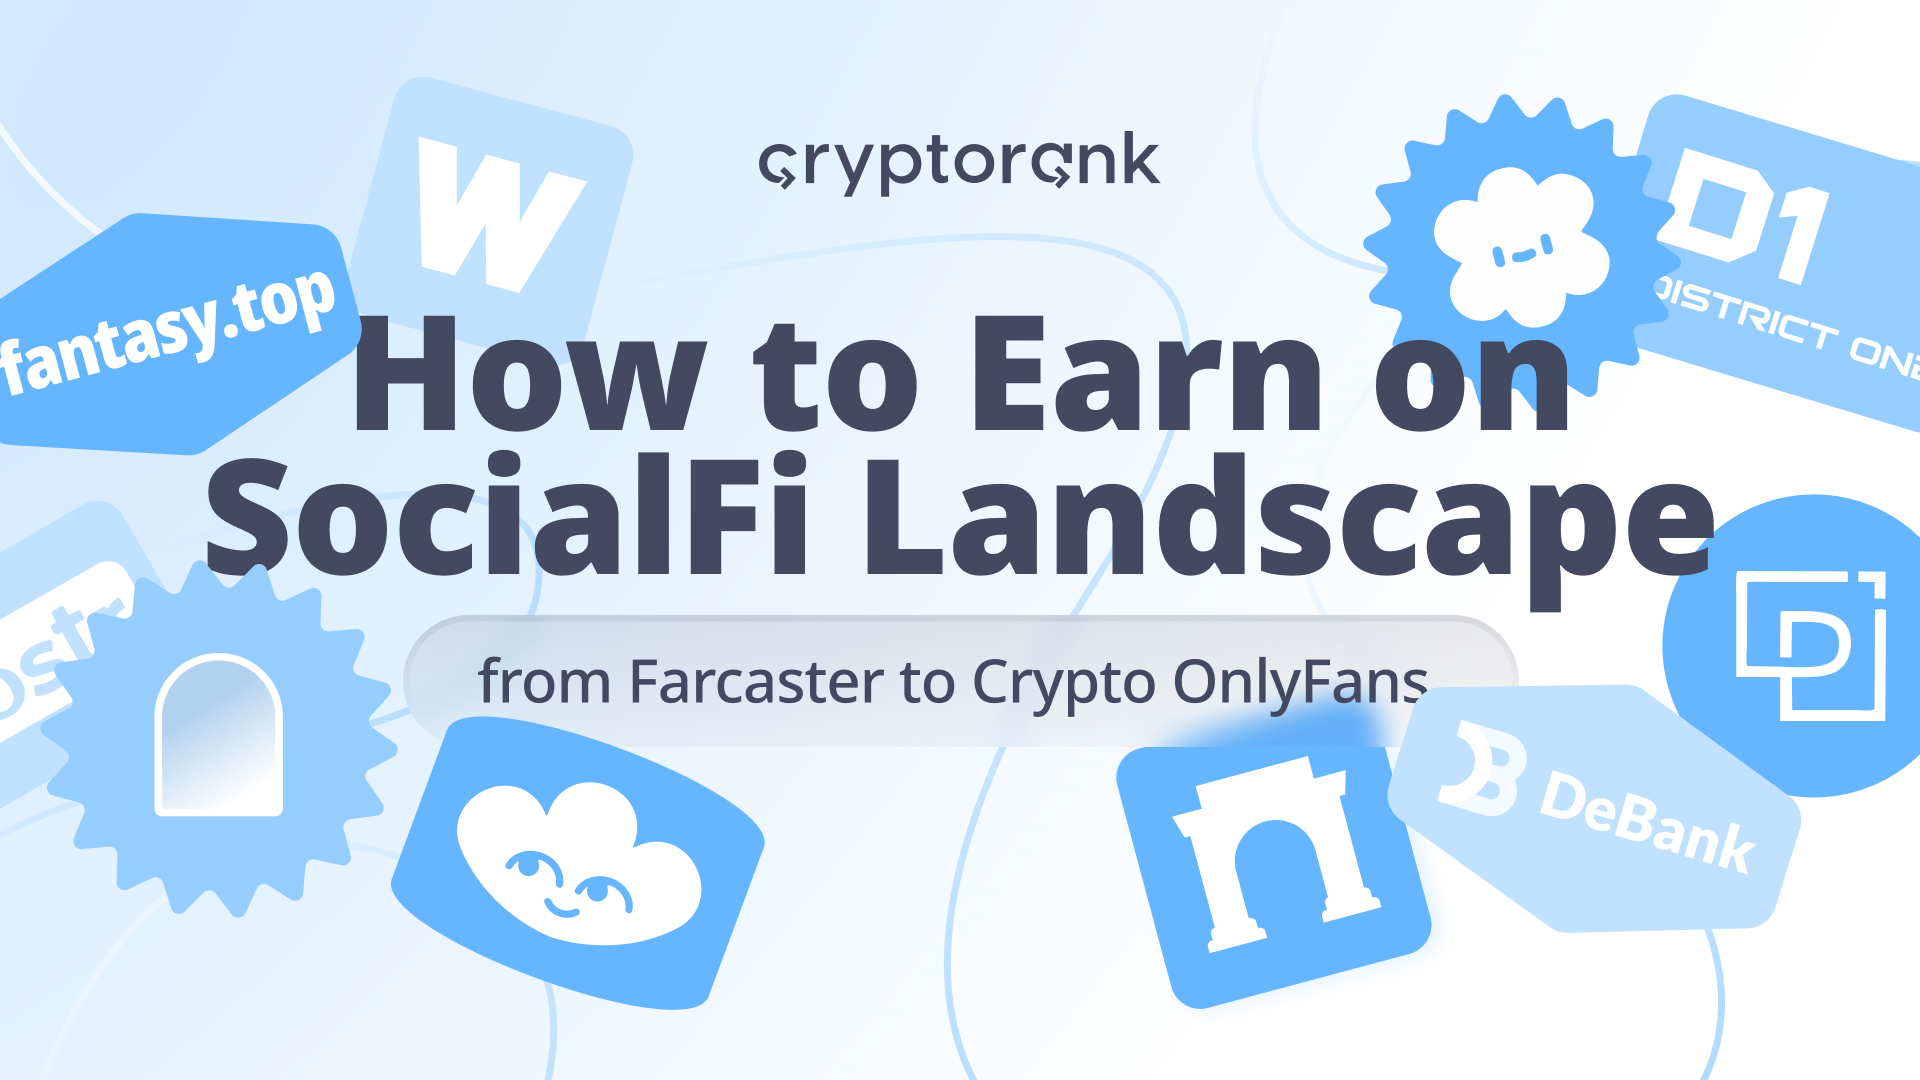 How to Earn on SocialFi Landscape: From Farcaster to Crypto OnlyFans